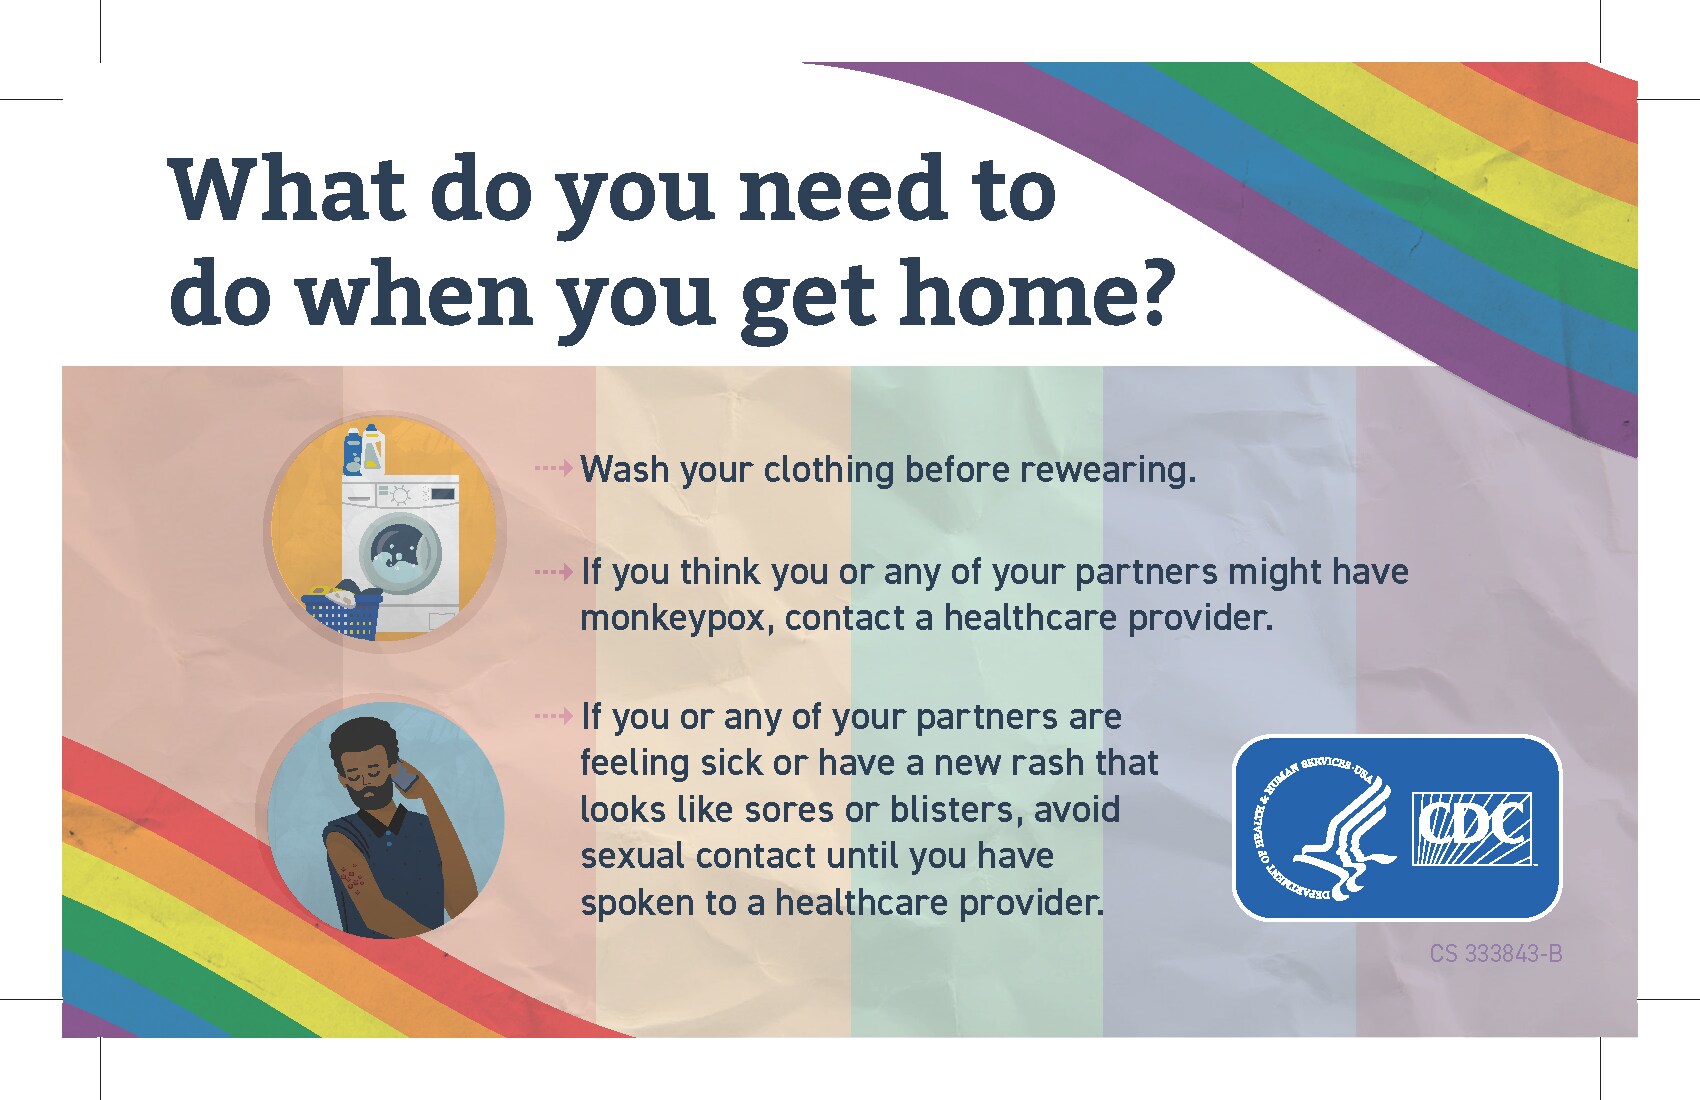 What do you need to do when you get home? Wash clothing; healthcare provider; avoid sexual contact if sick or have rash.